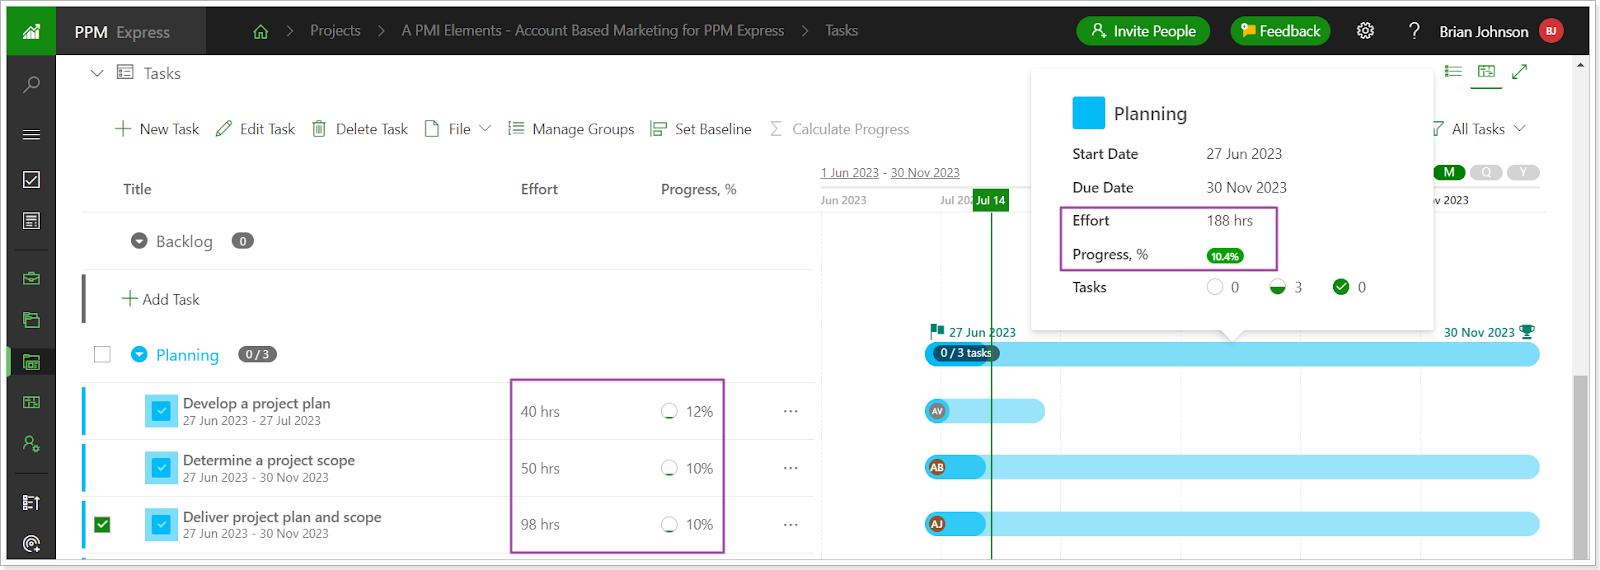 Effort and Progress calculation in PPM Exress